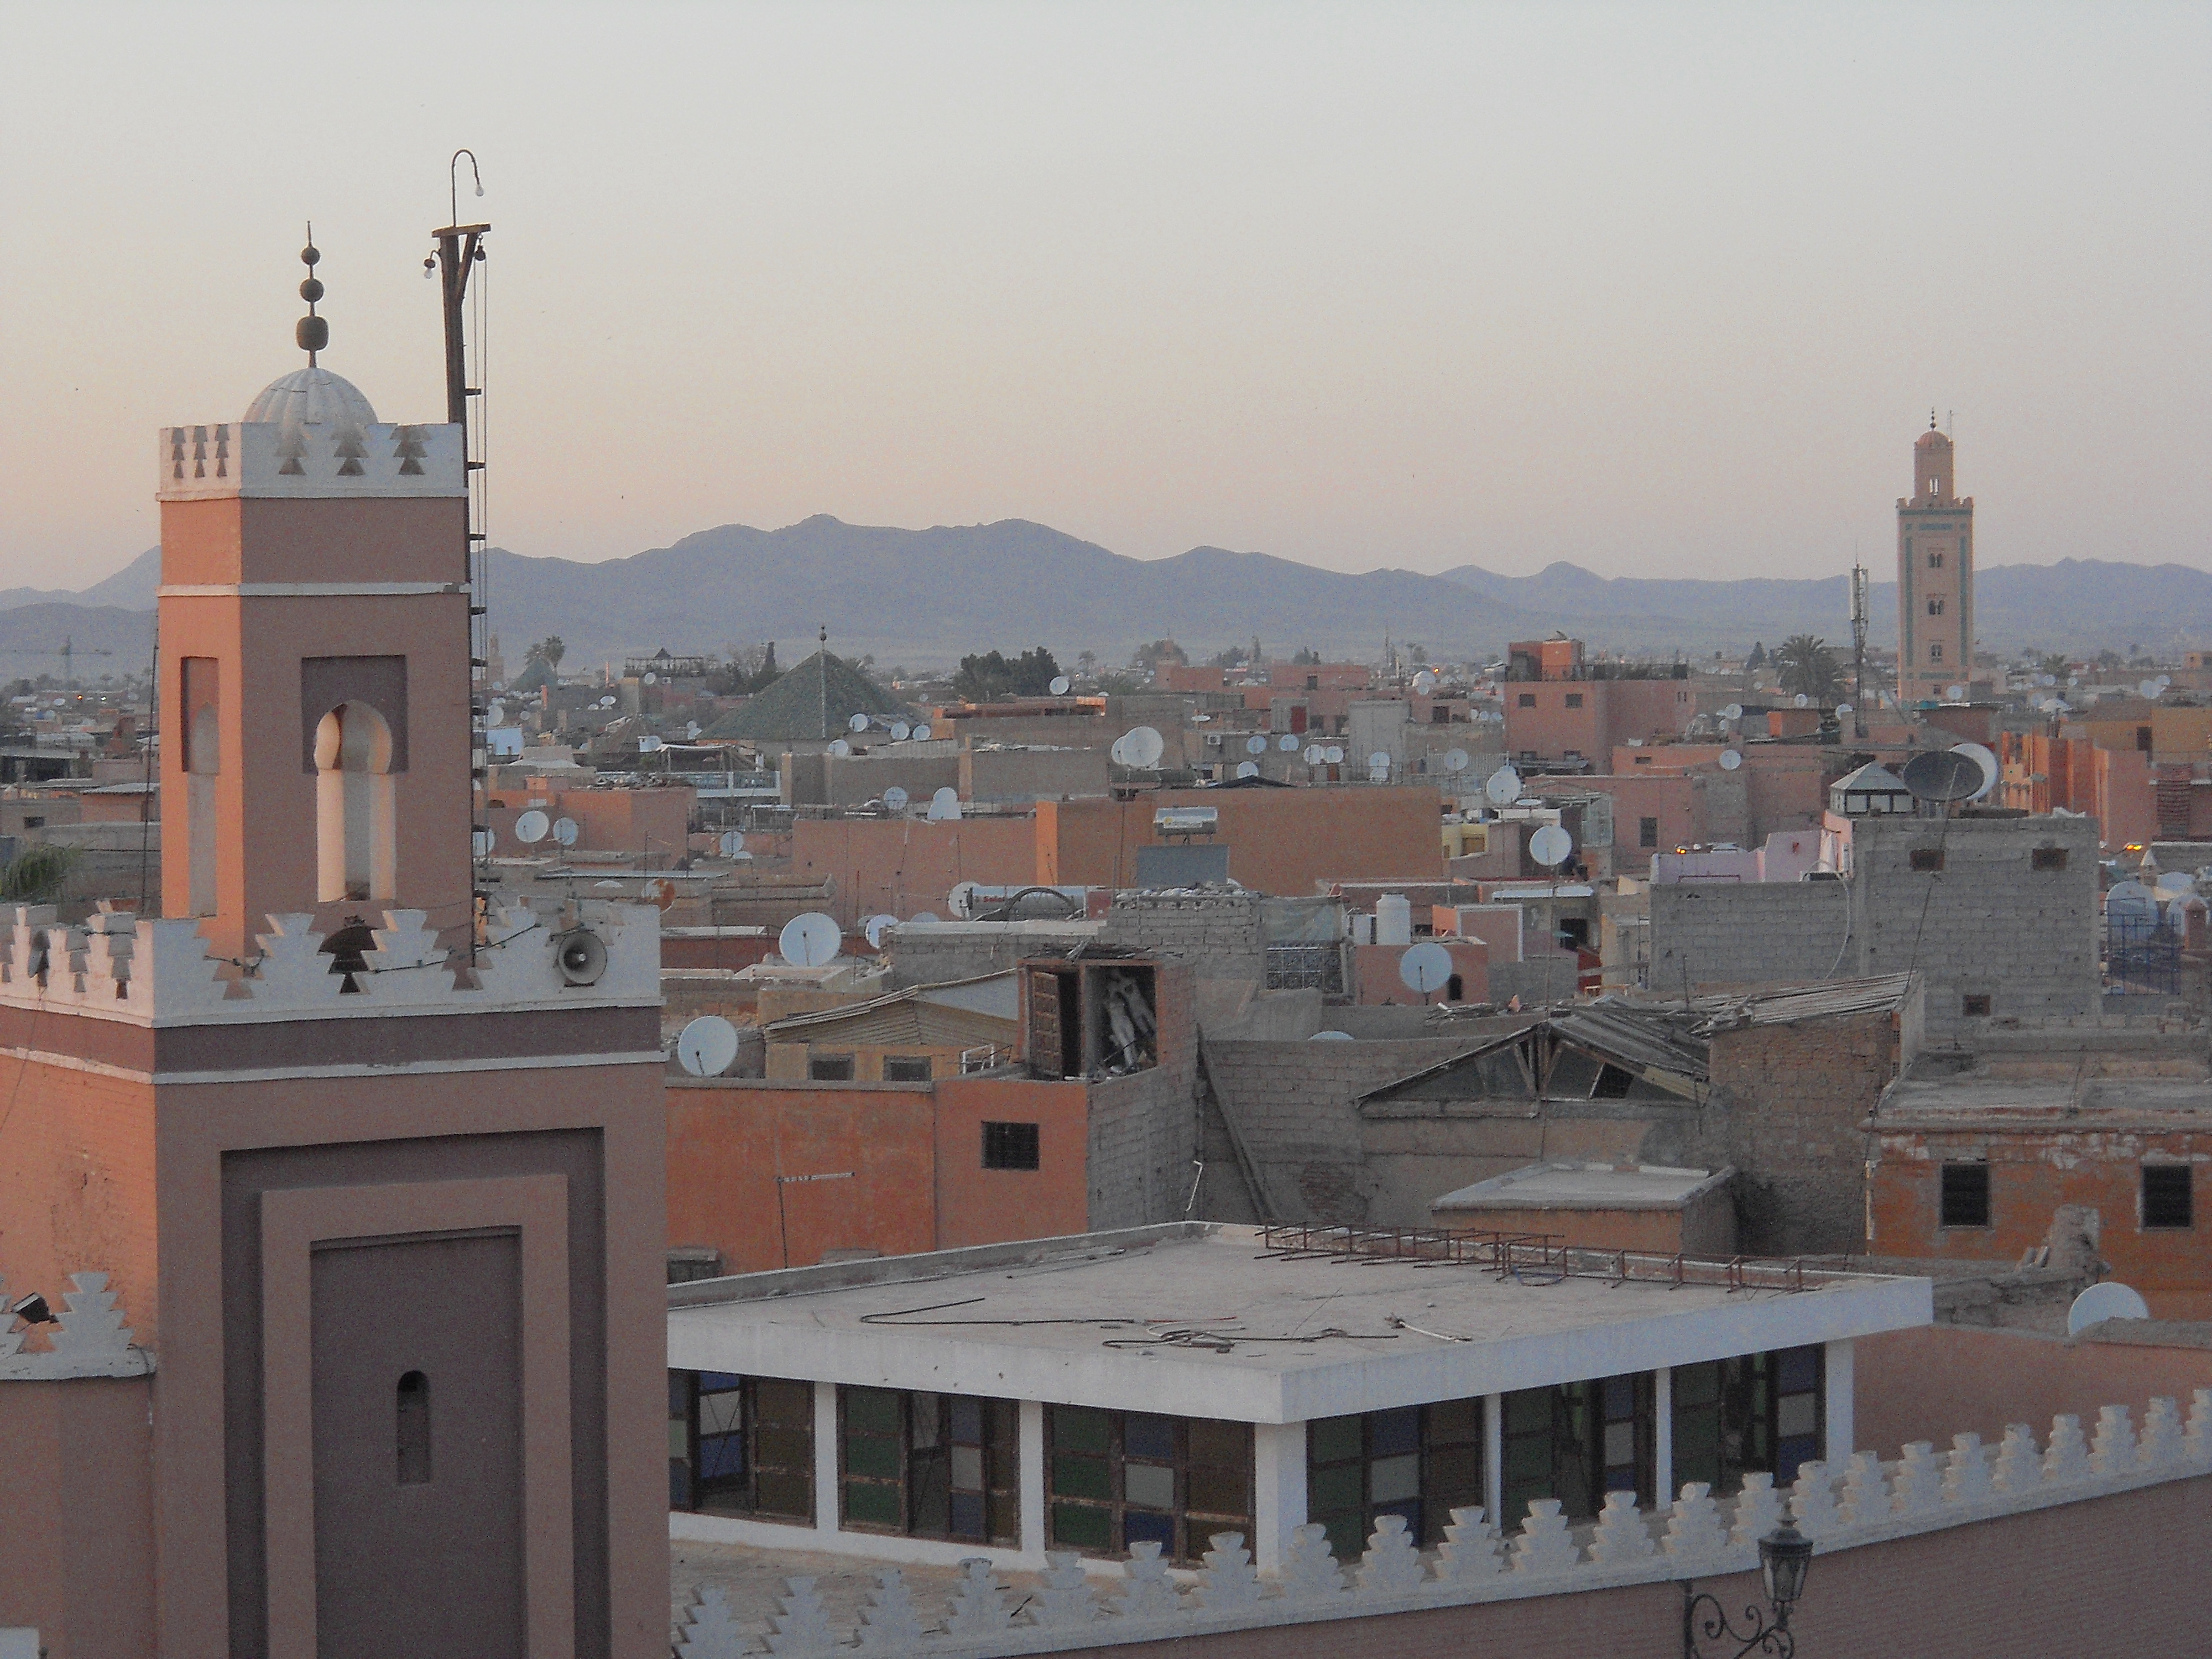 Morocco - Day Ten - Final Day and revisiting Marrakech